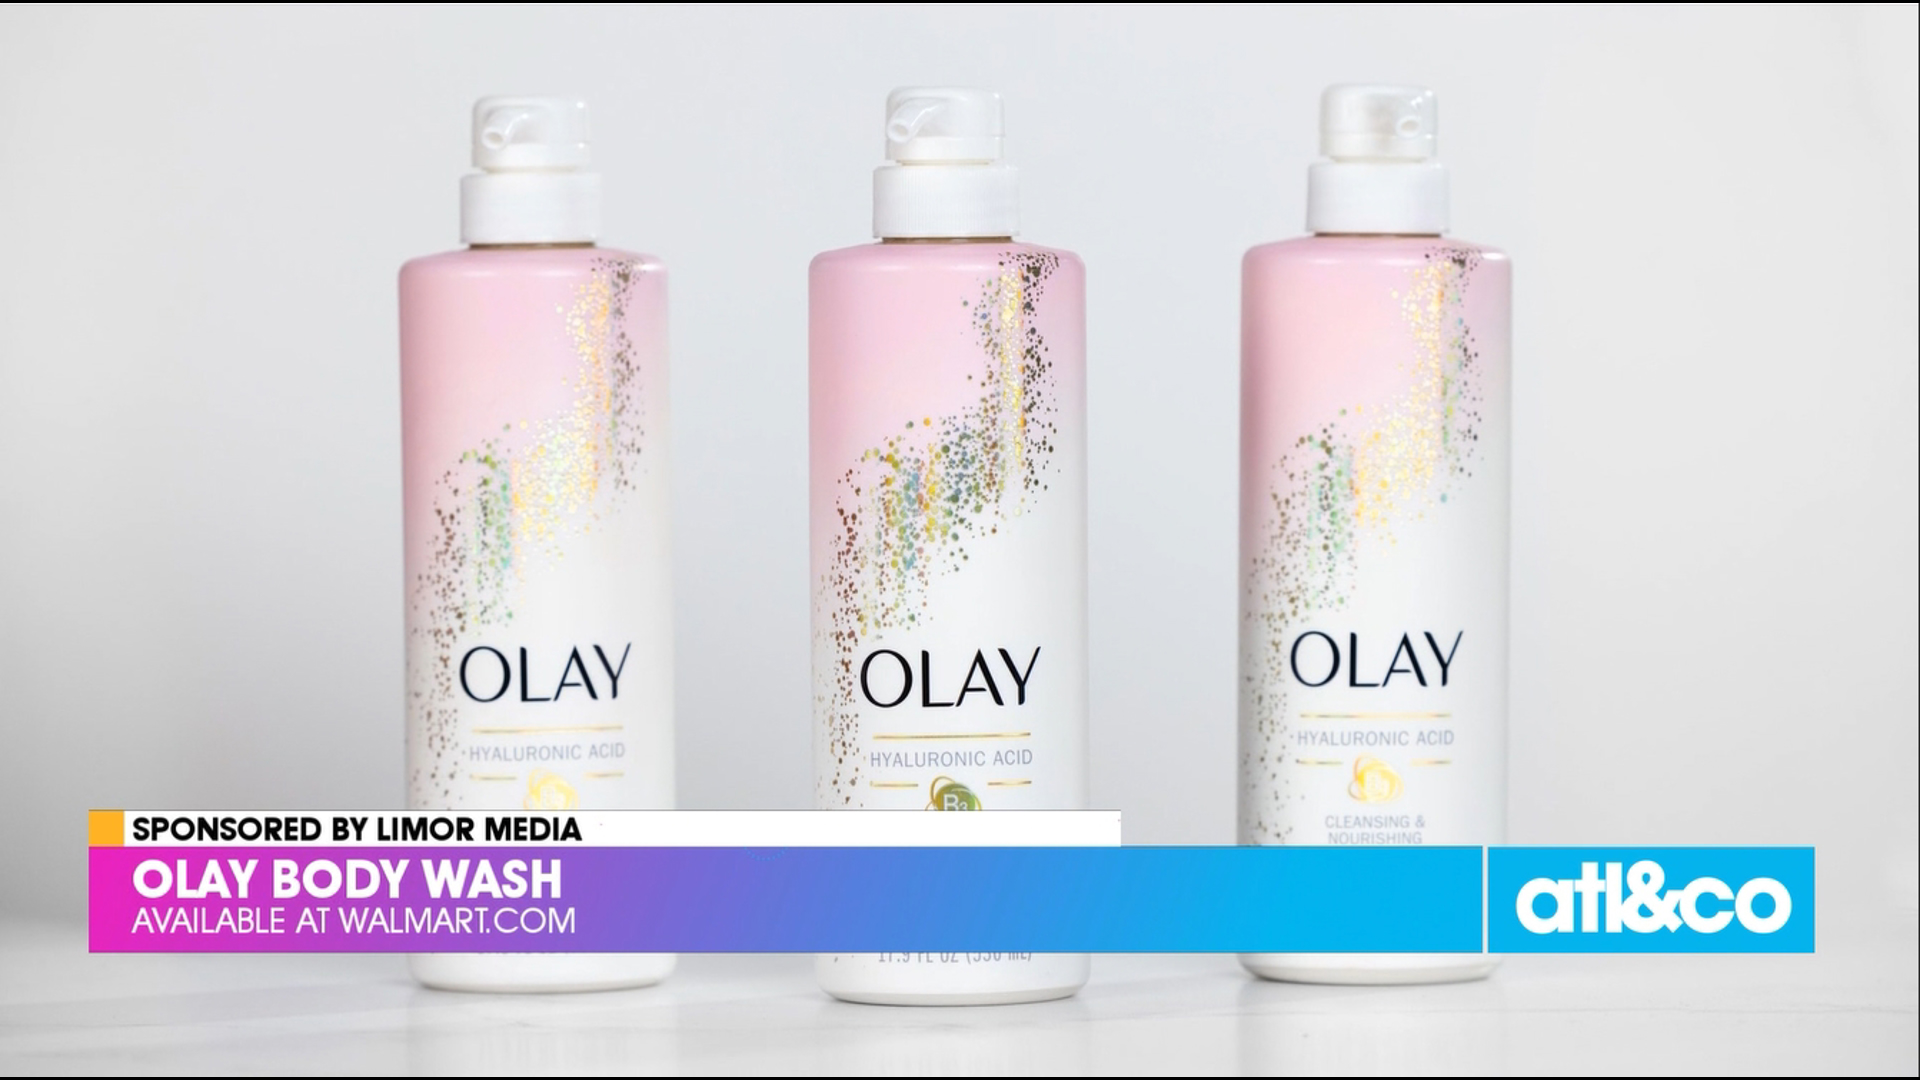 Lifestyle contributor Limor Suss shares winter wellness essentials from Olay, Secret, and Eucerin.